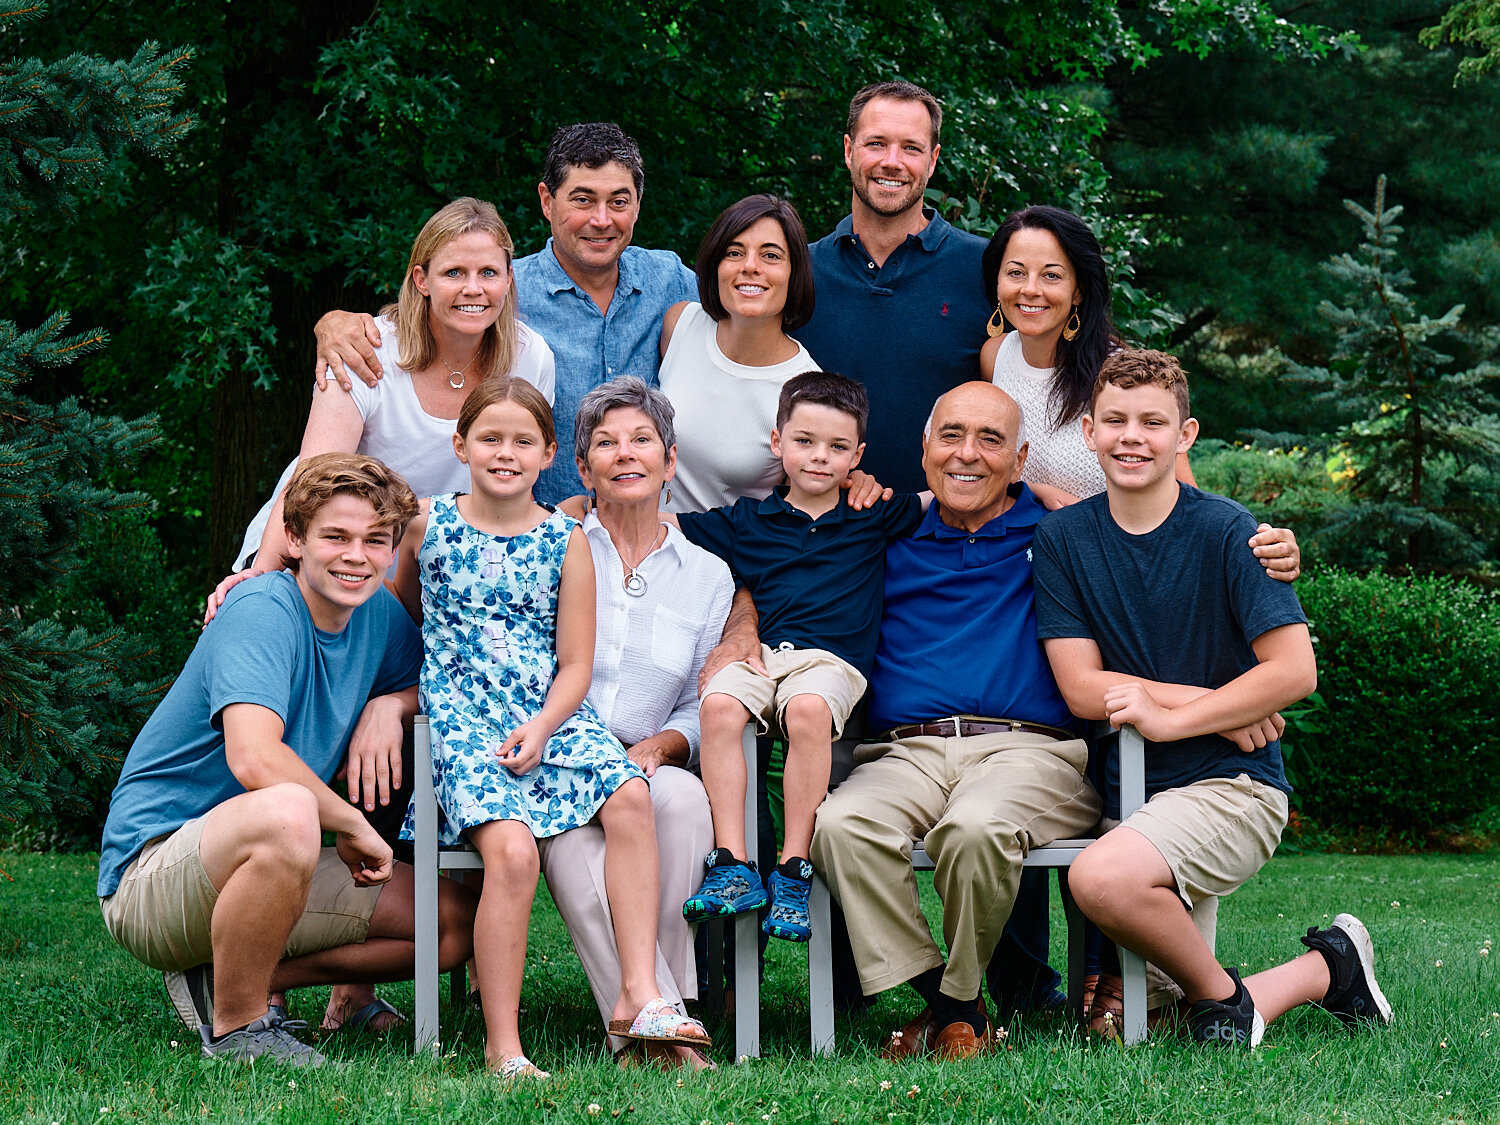  The extended Peluso family members are posing for a group photograph in their house in Sewickley, west of Pittsburgh, Pennsylvania. They are dressed in white and blue and look very handsome and happy. 